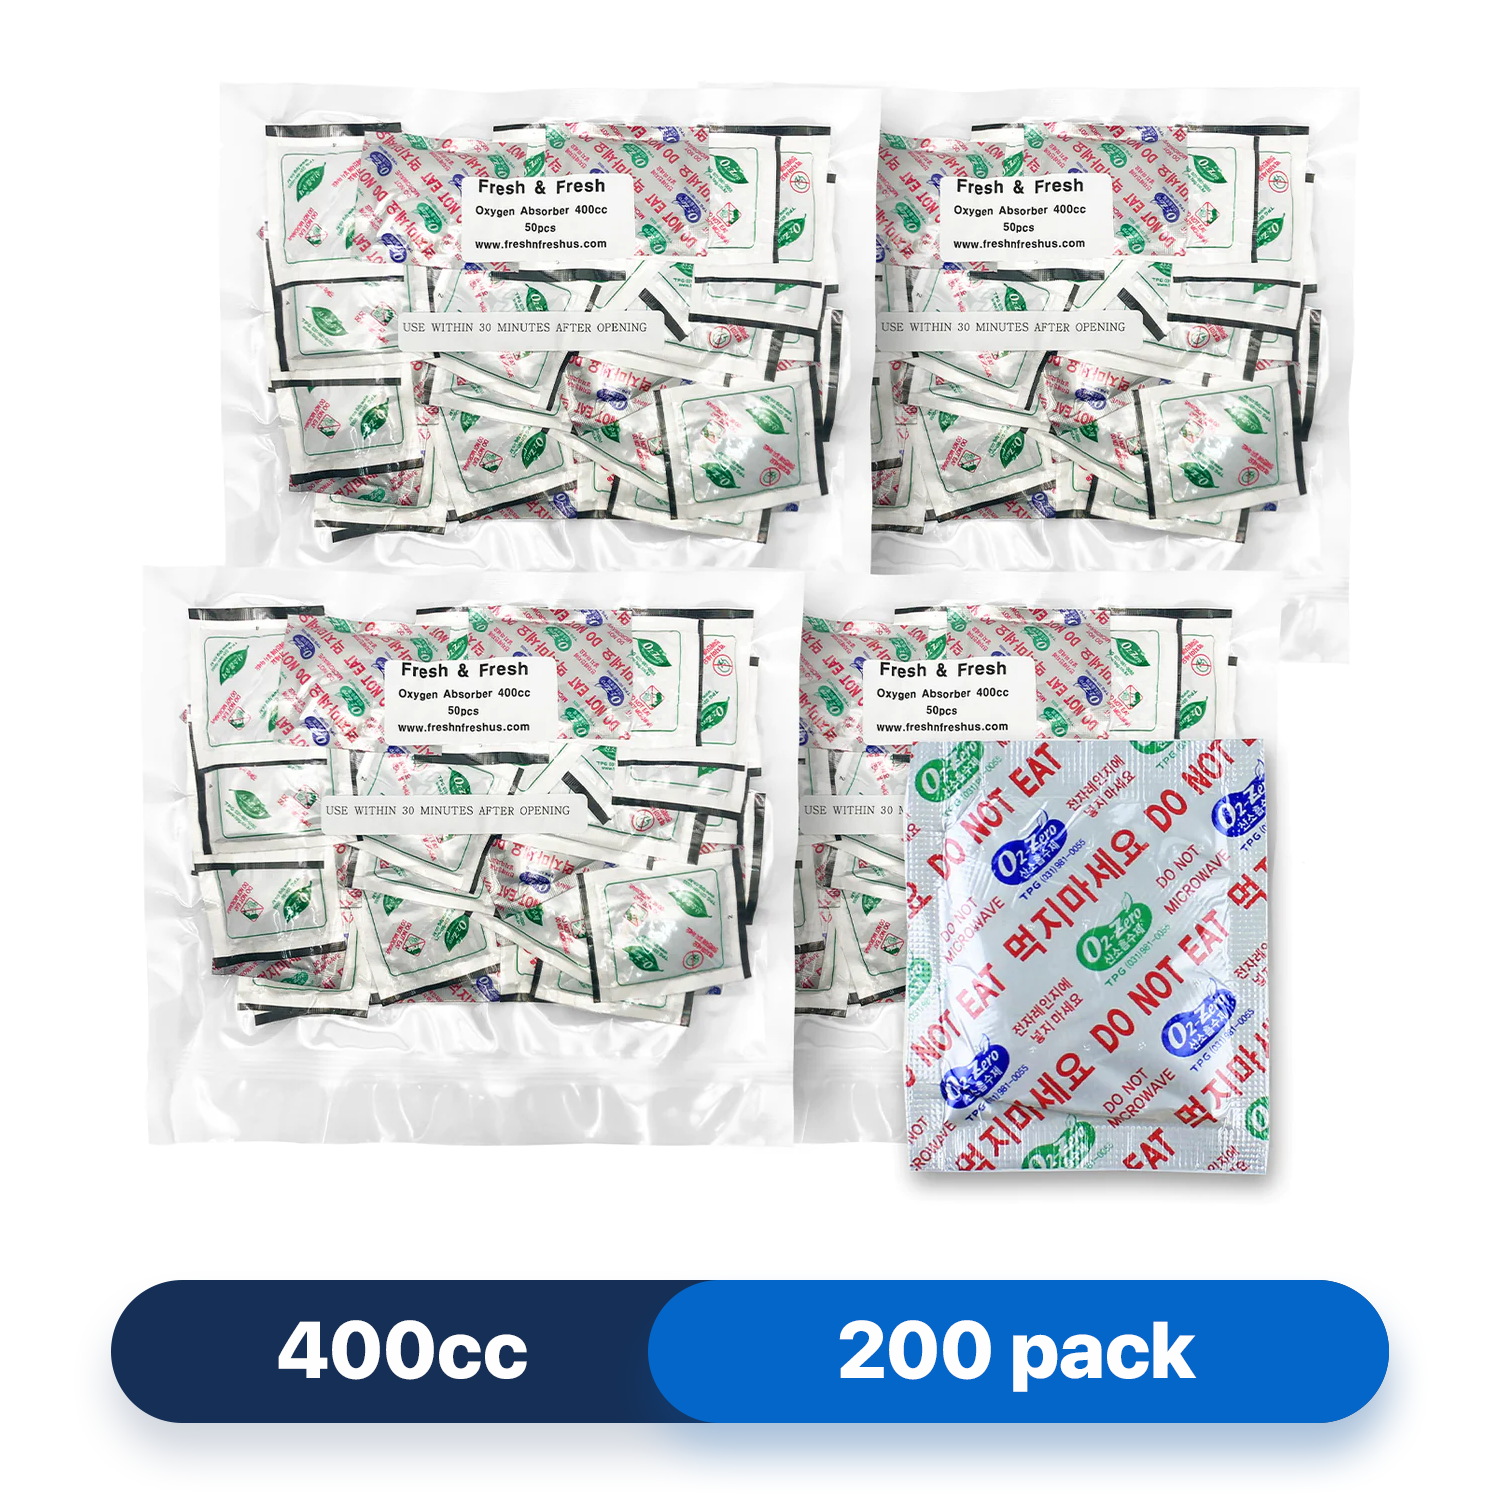 Fresh & Fresh (200 Packs) 400 CC Premium Oxygen Absorbers(4 Bag of 50 Packets) - ISO 9001 Certified Facility Manufactured